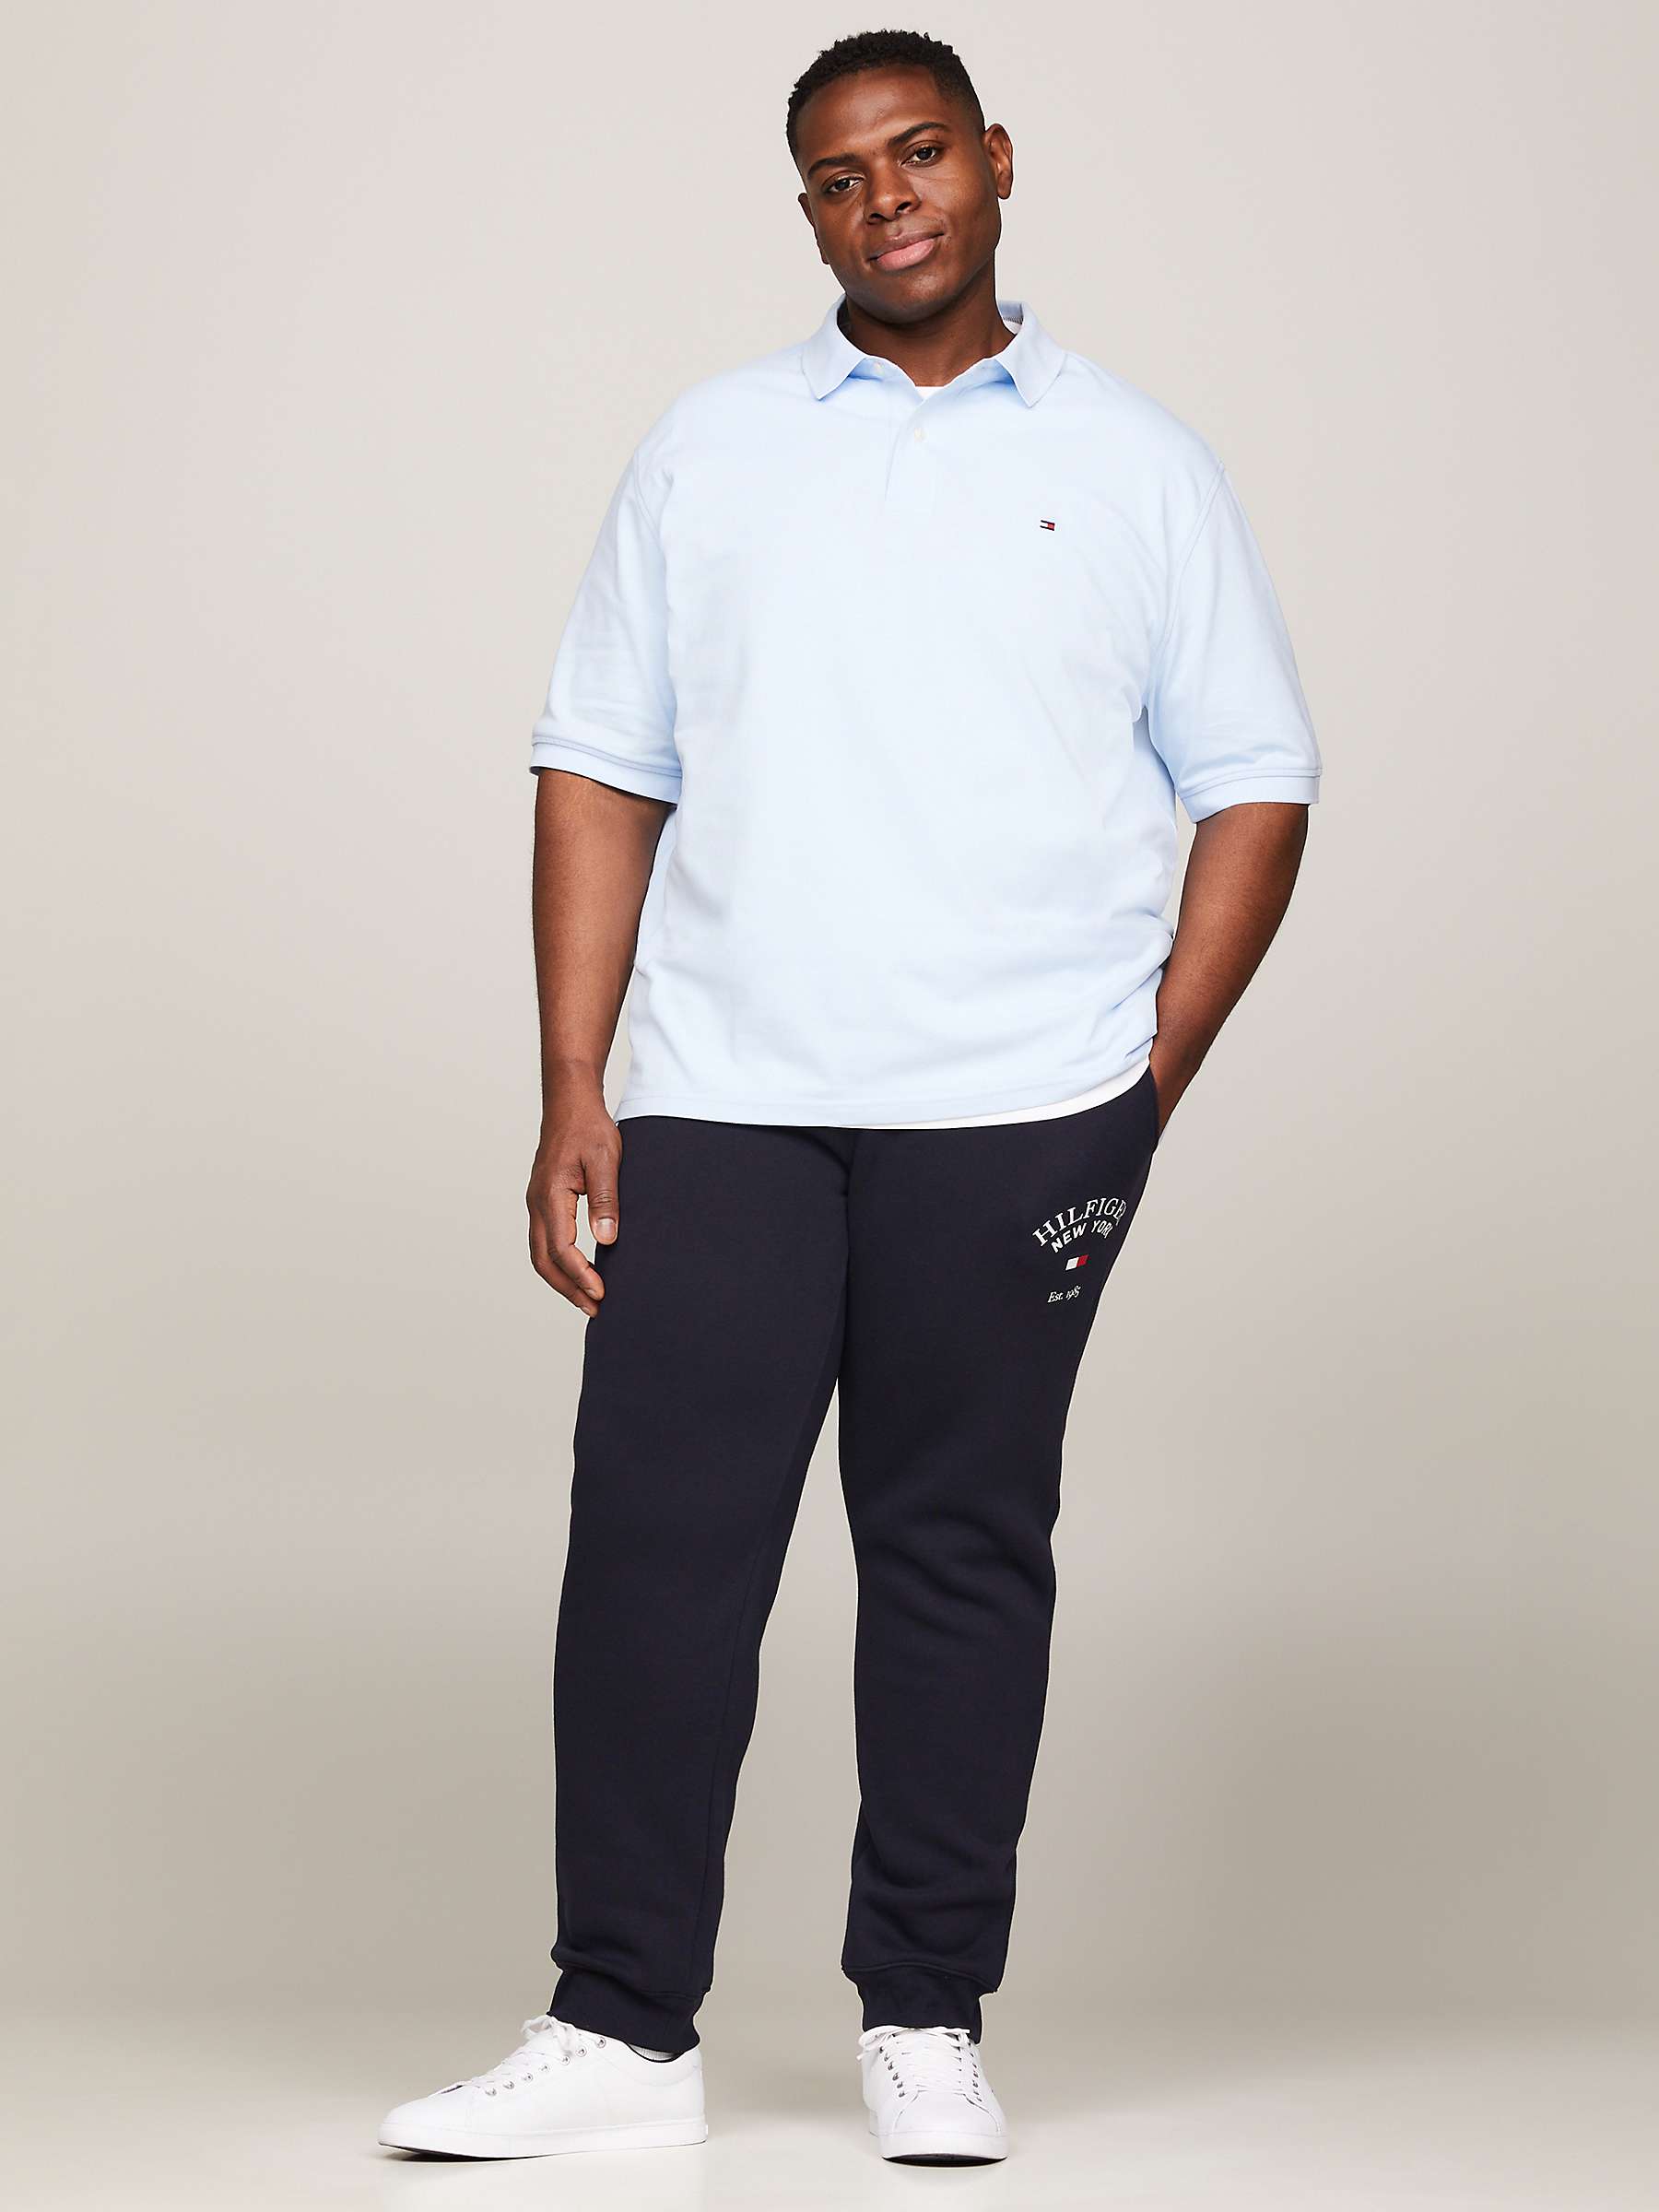 Buy Tommy Hilfiger Big & Tall 1985 Polo Shirt Online at johnlewis.com